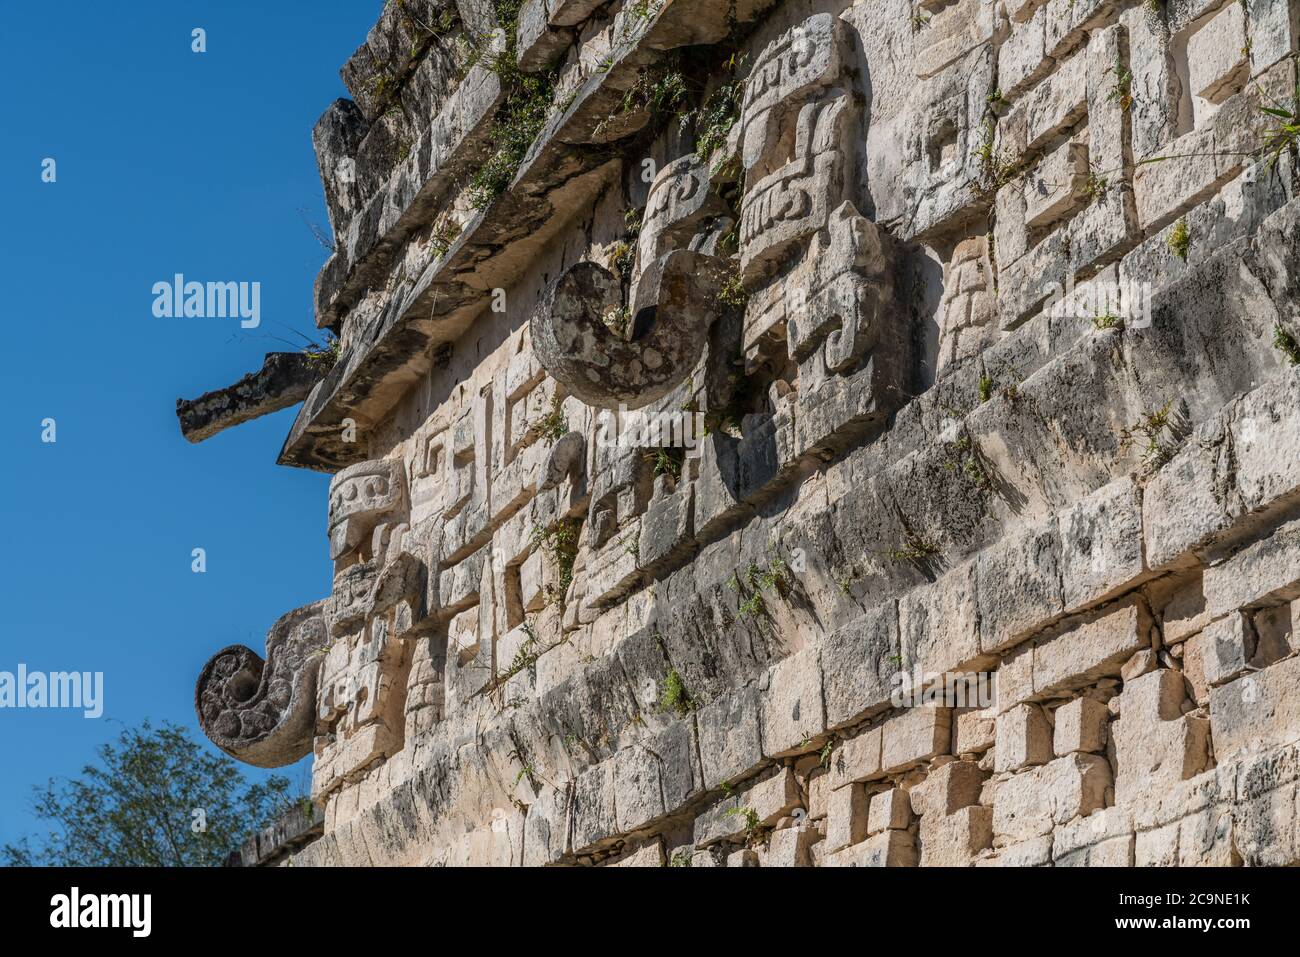 Chaac masks on the facade of the Iglesia or Church in the Nunnery Complex in the ruins of the great  Mayan city of Chichen Itza, Yucatan, Mexico. Stock Photo